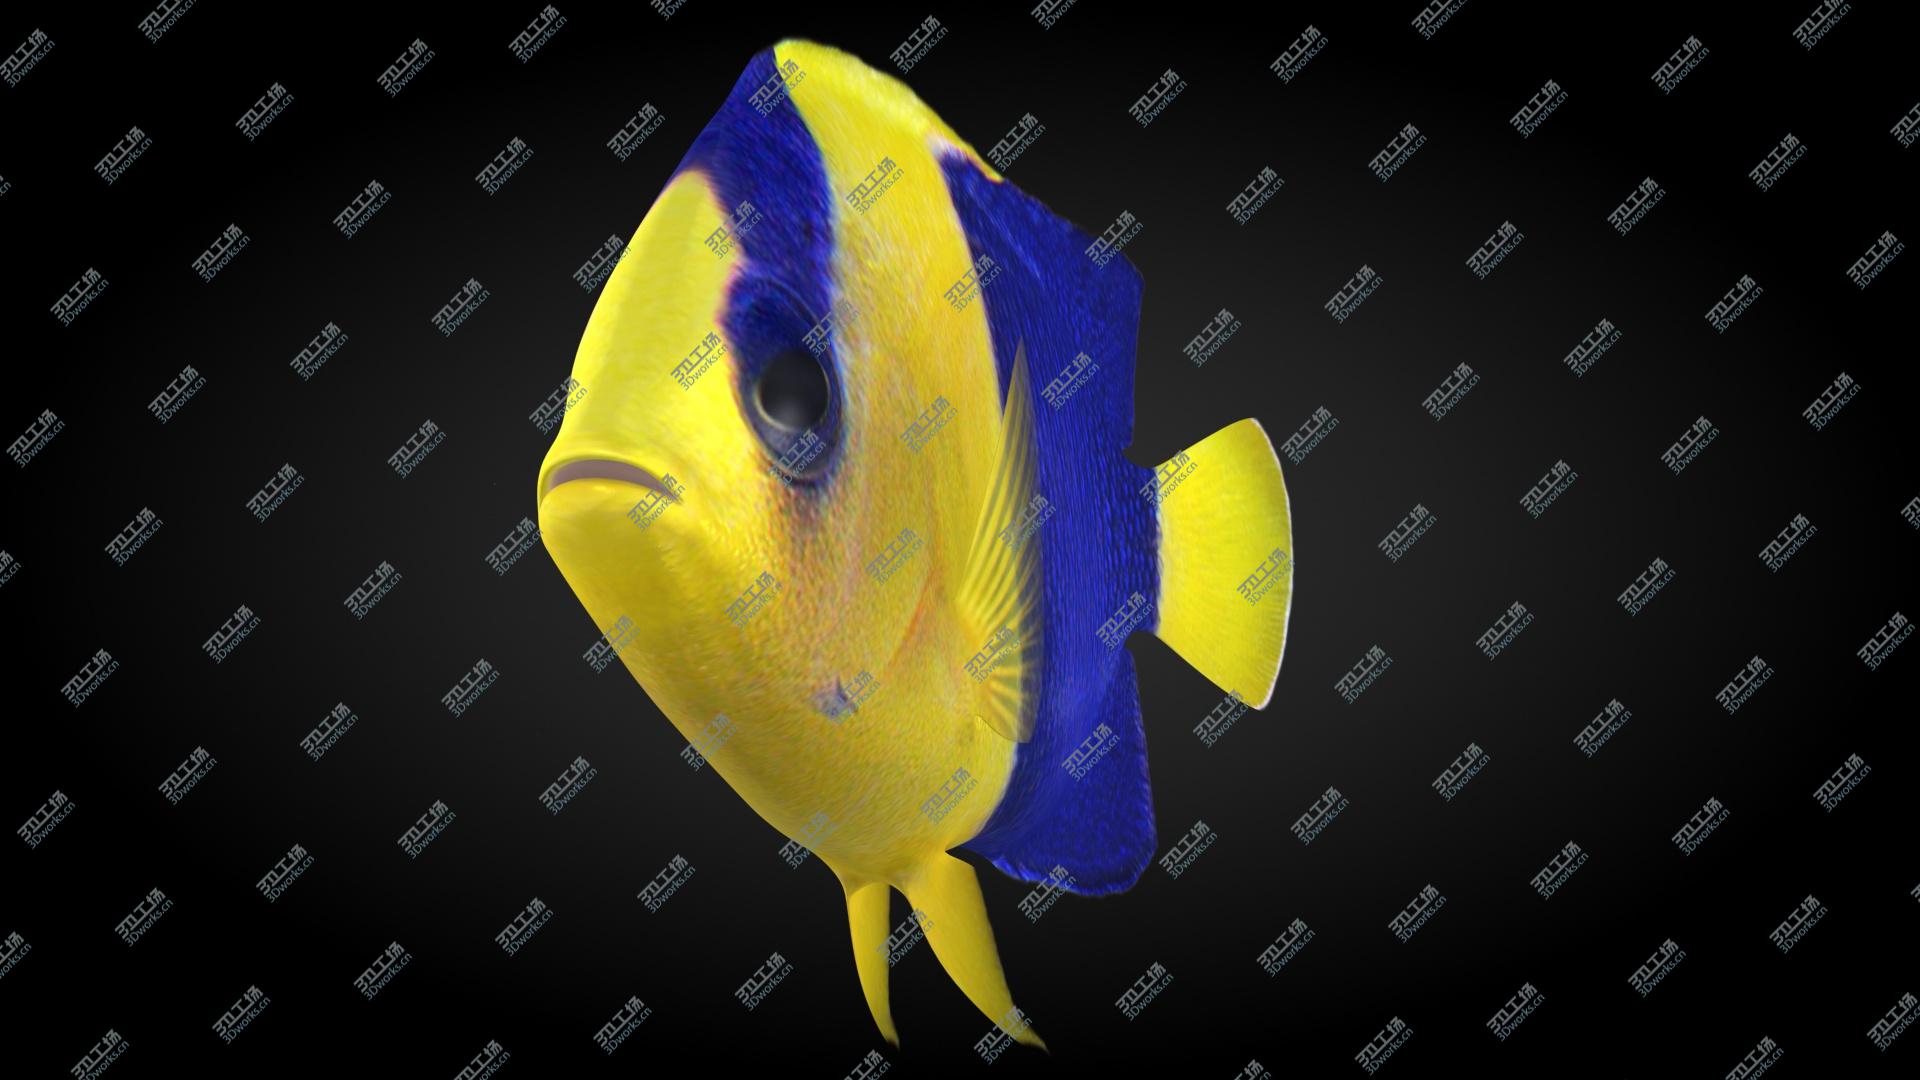 images/goods_img/202105071/3D Bicolor Angelfish Animated/3.jpg